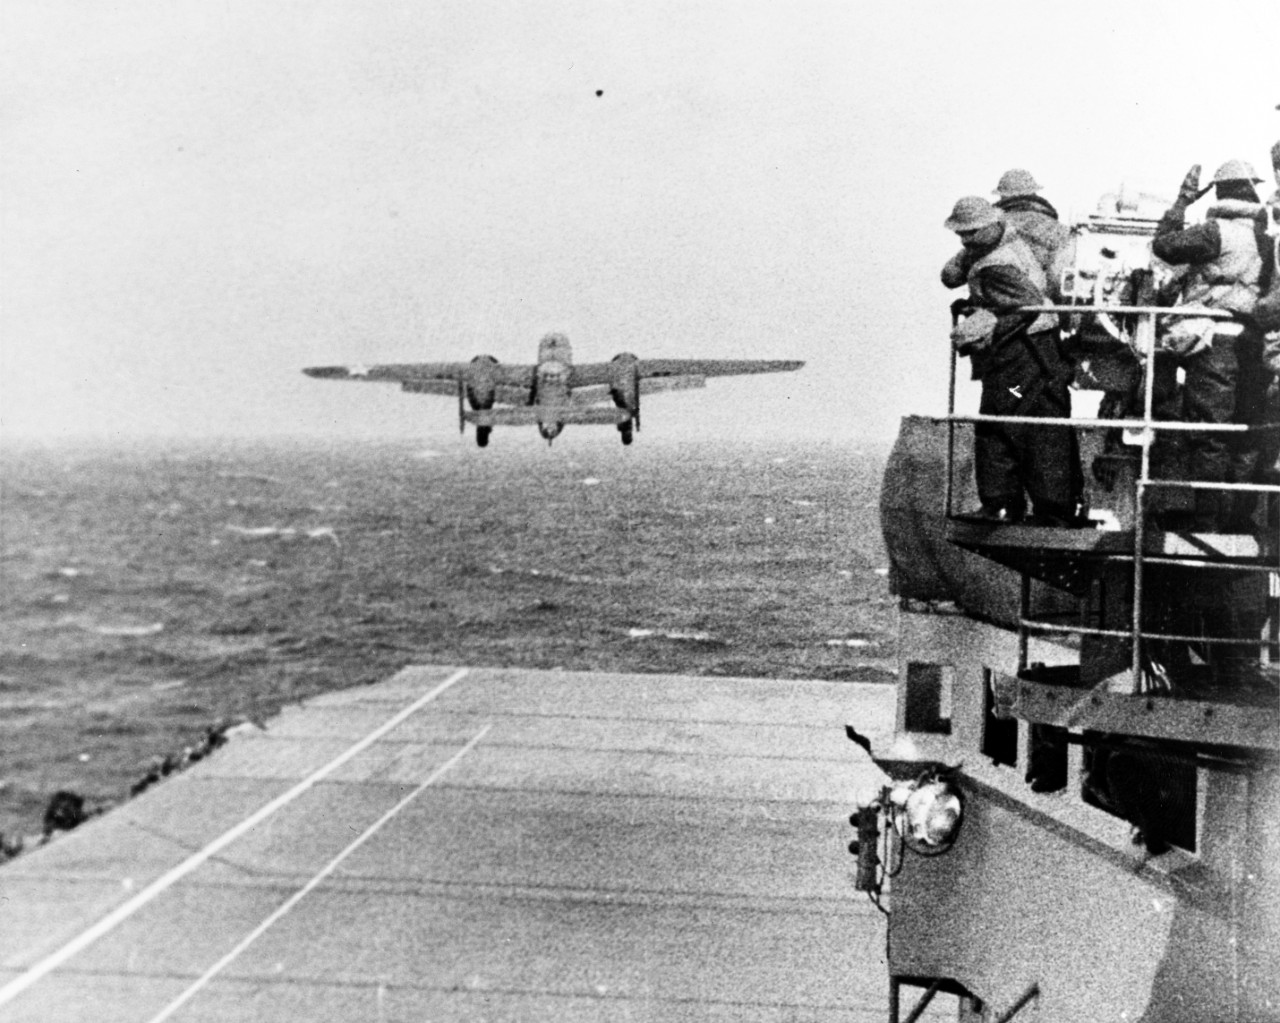 A B-25B Mitchell of the Army’s 17th Bombardment Group takes off from Hornet to bomb the Japanese home islands, 18 April 1942. Note the men wearing the old British style M1917A1 helmets as they watch from the signal lamp platform (right). (U.S. Na...